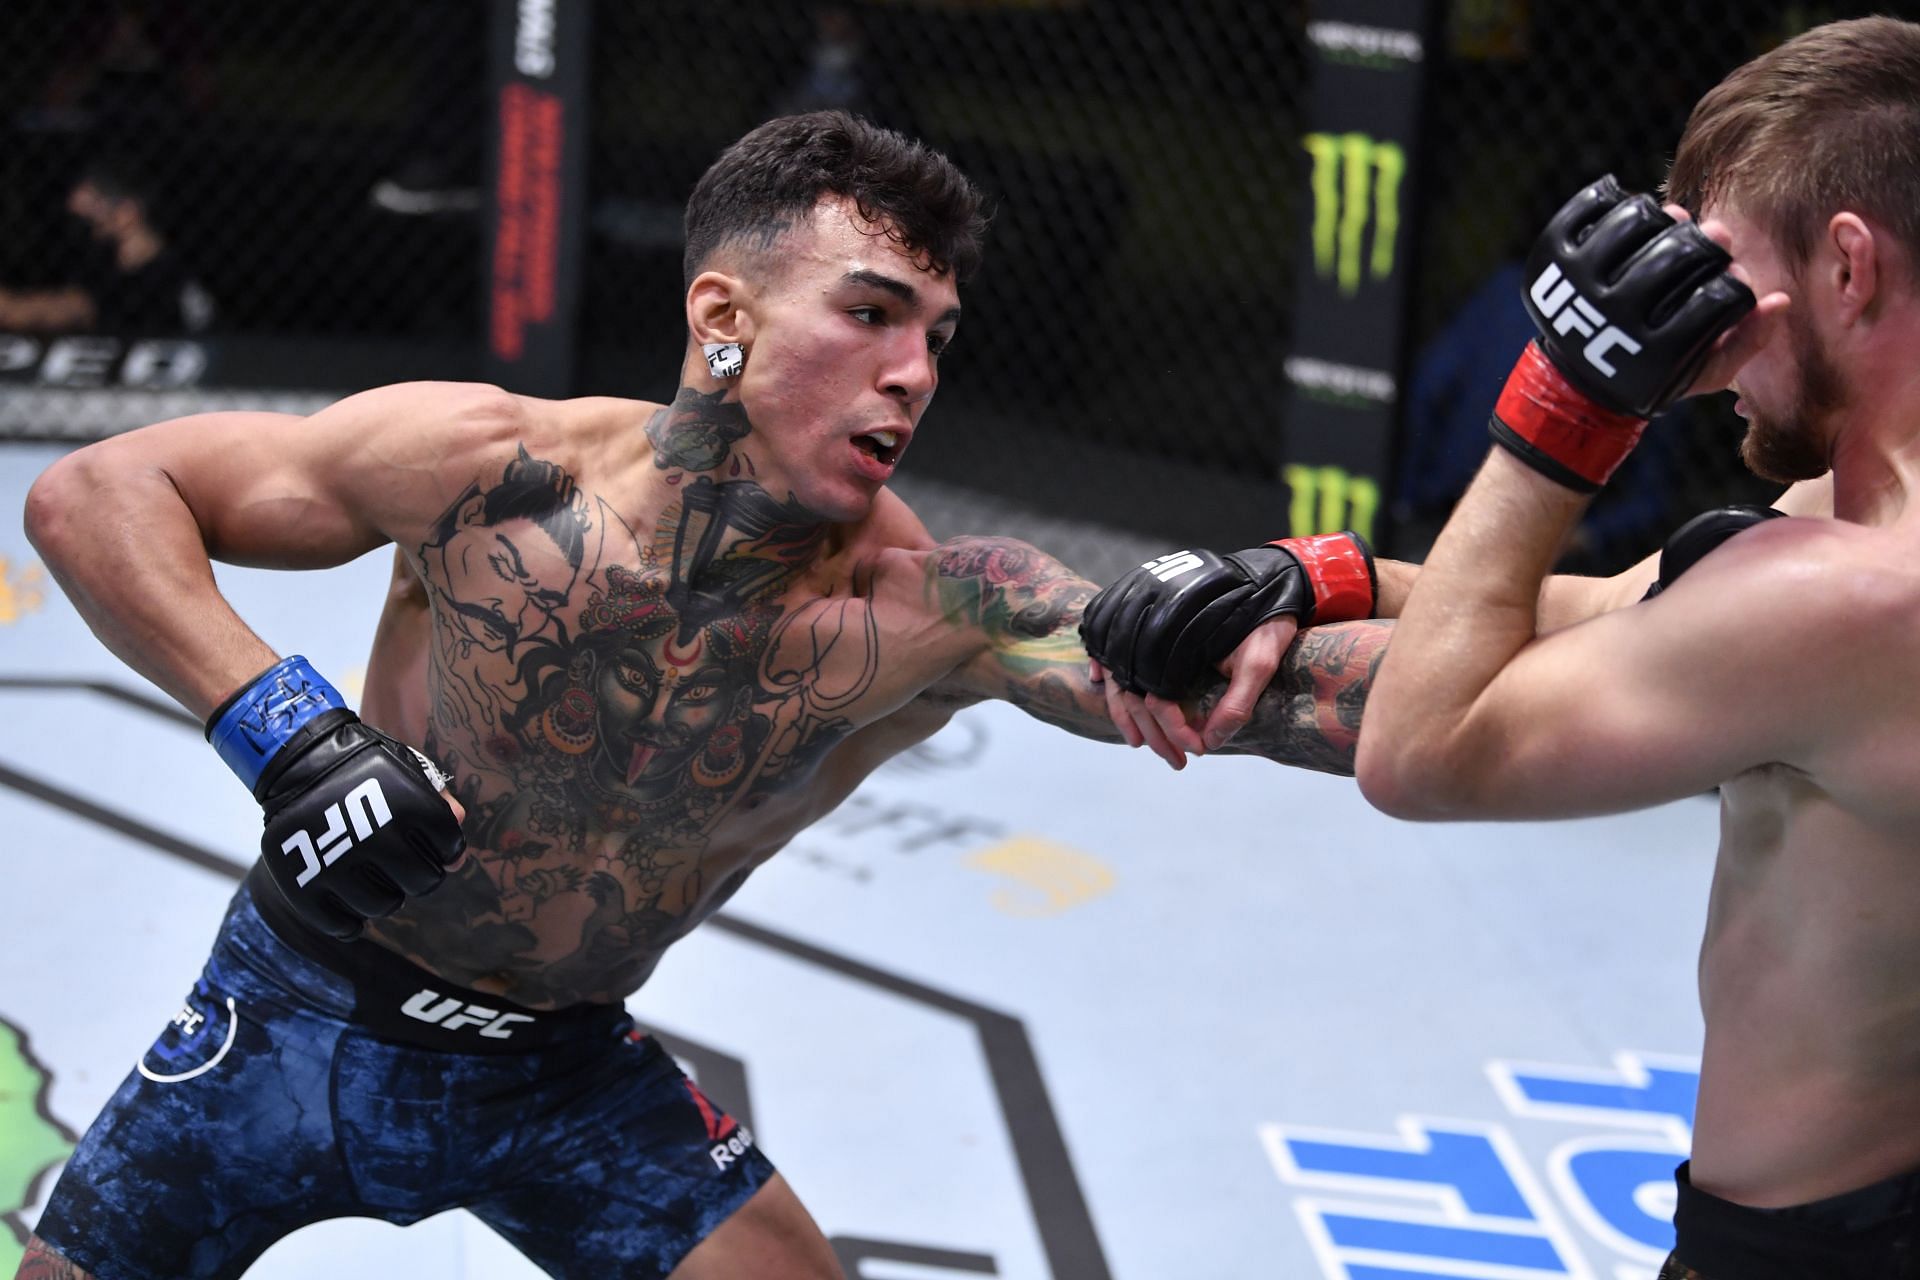 Andre Fili is one of the most exciting fighters to watch ihe featherweight division